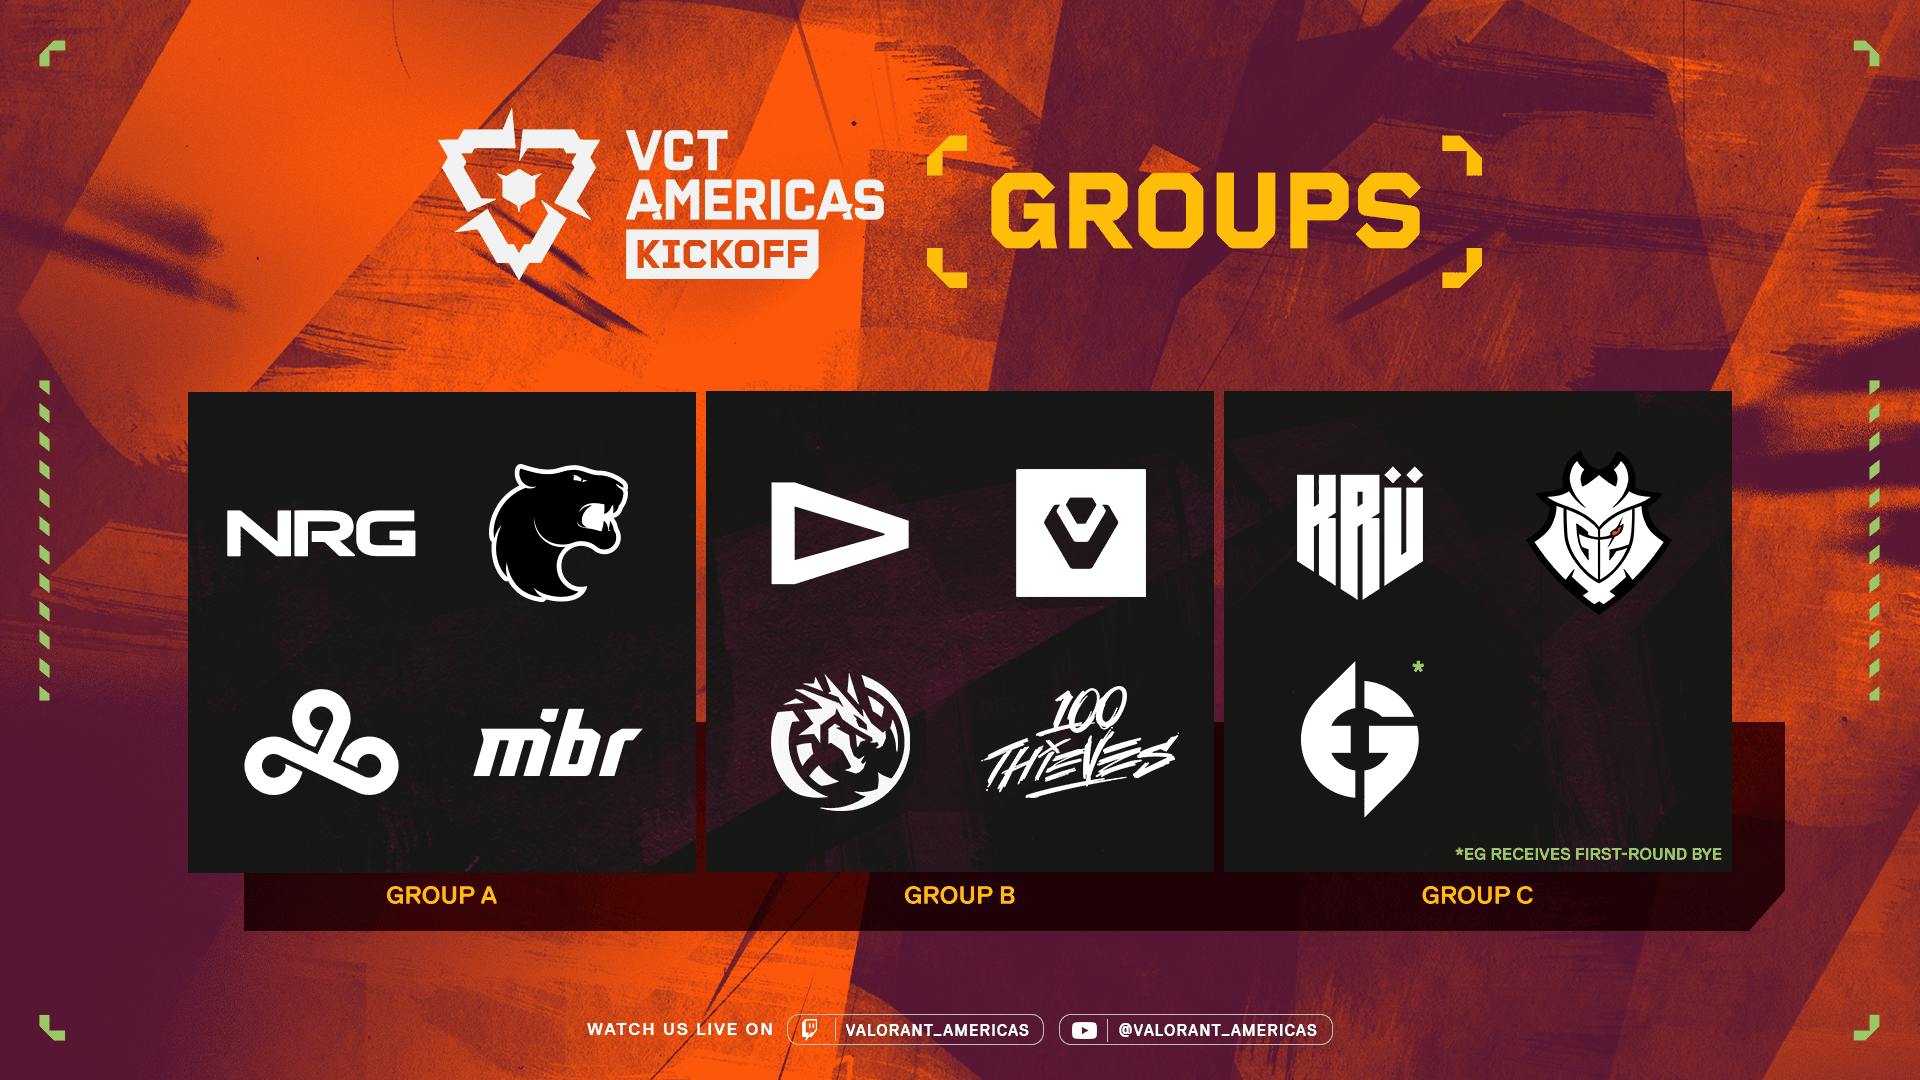 VCT Americas Kickoff: Group Stage 